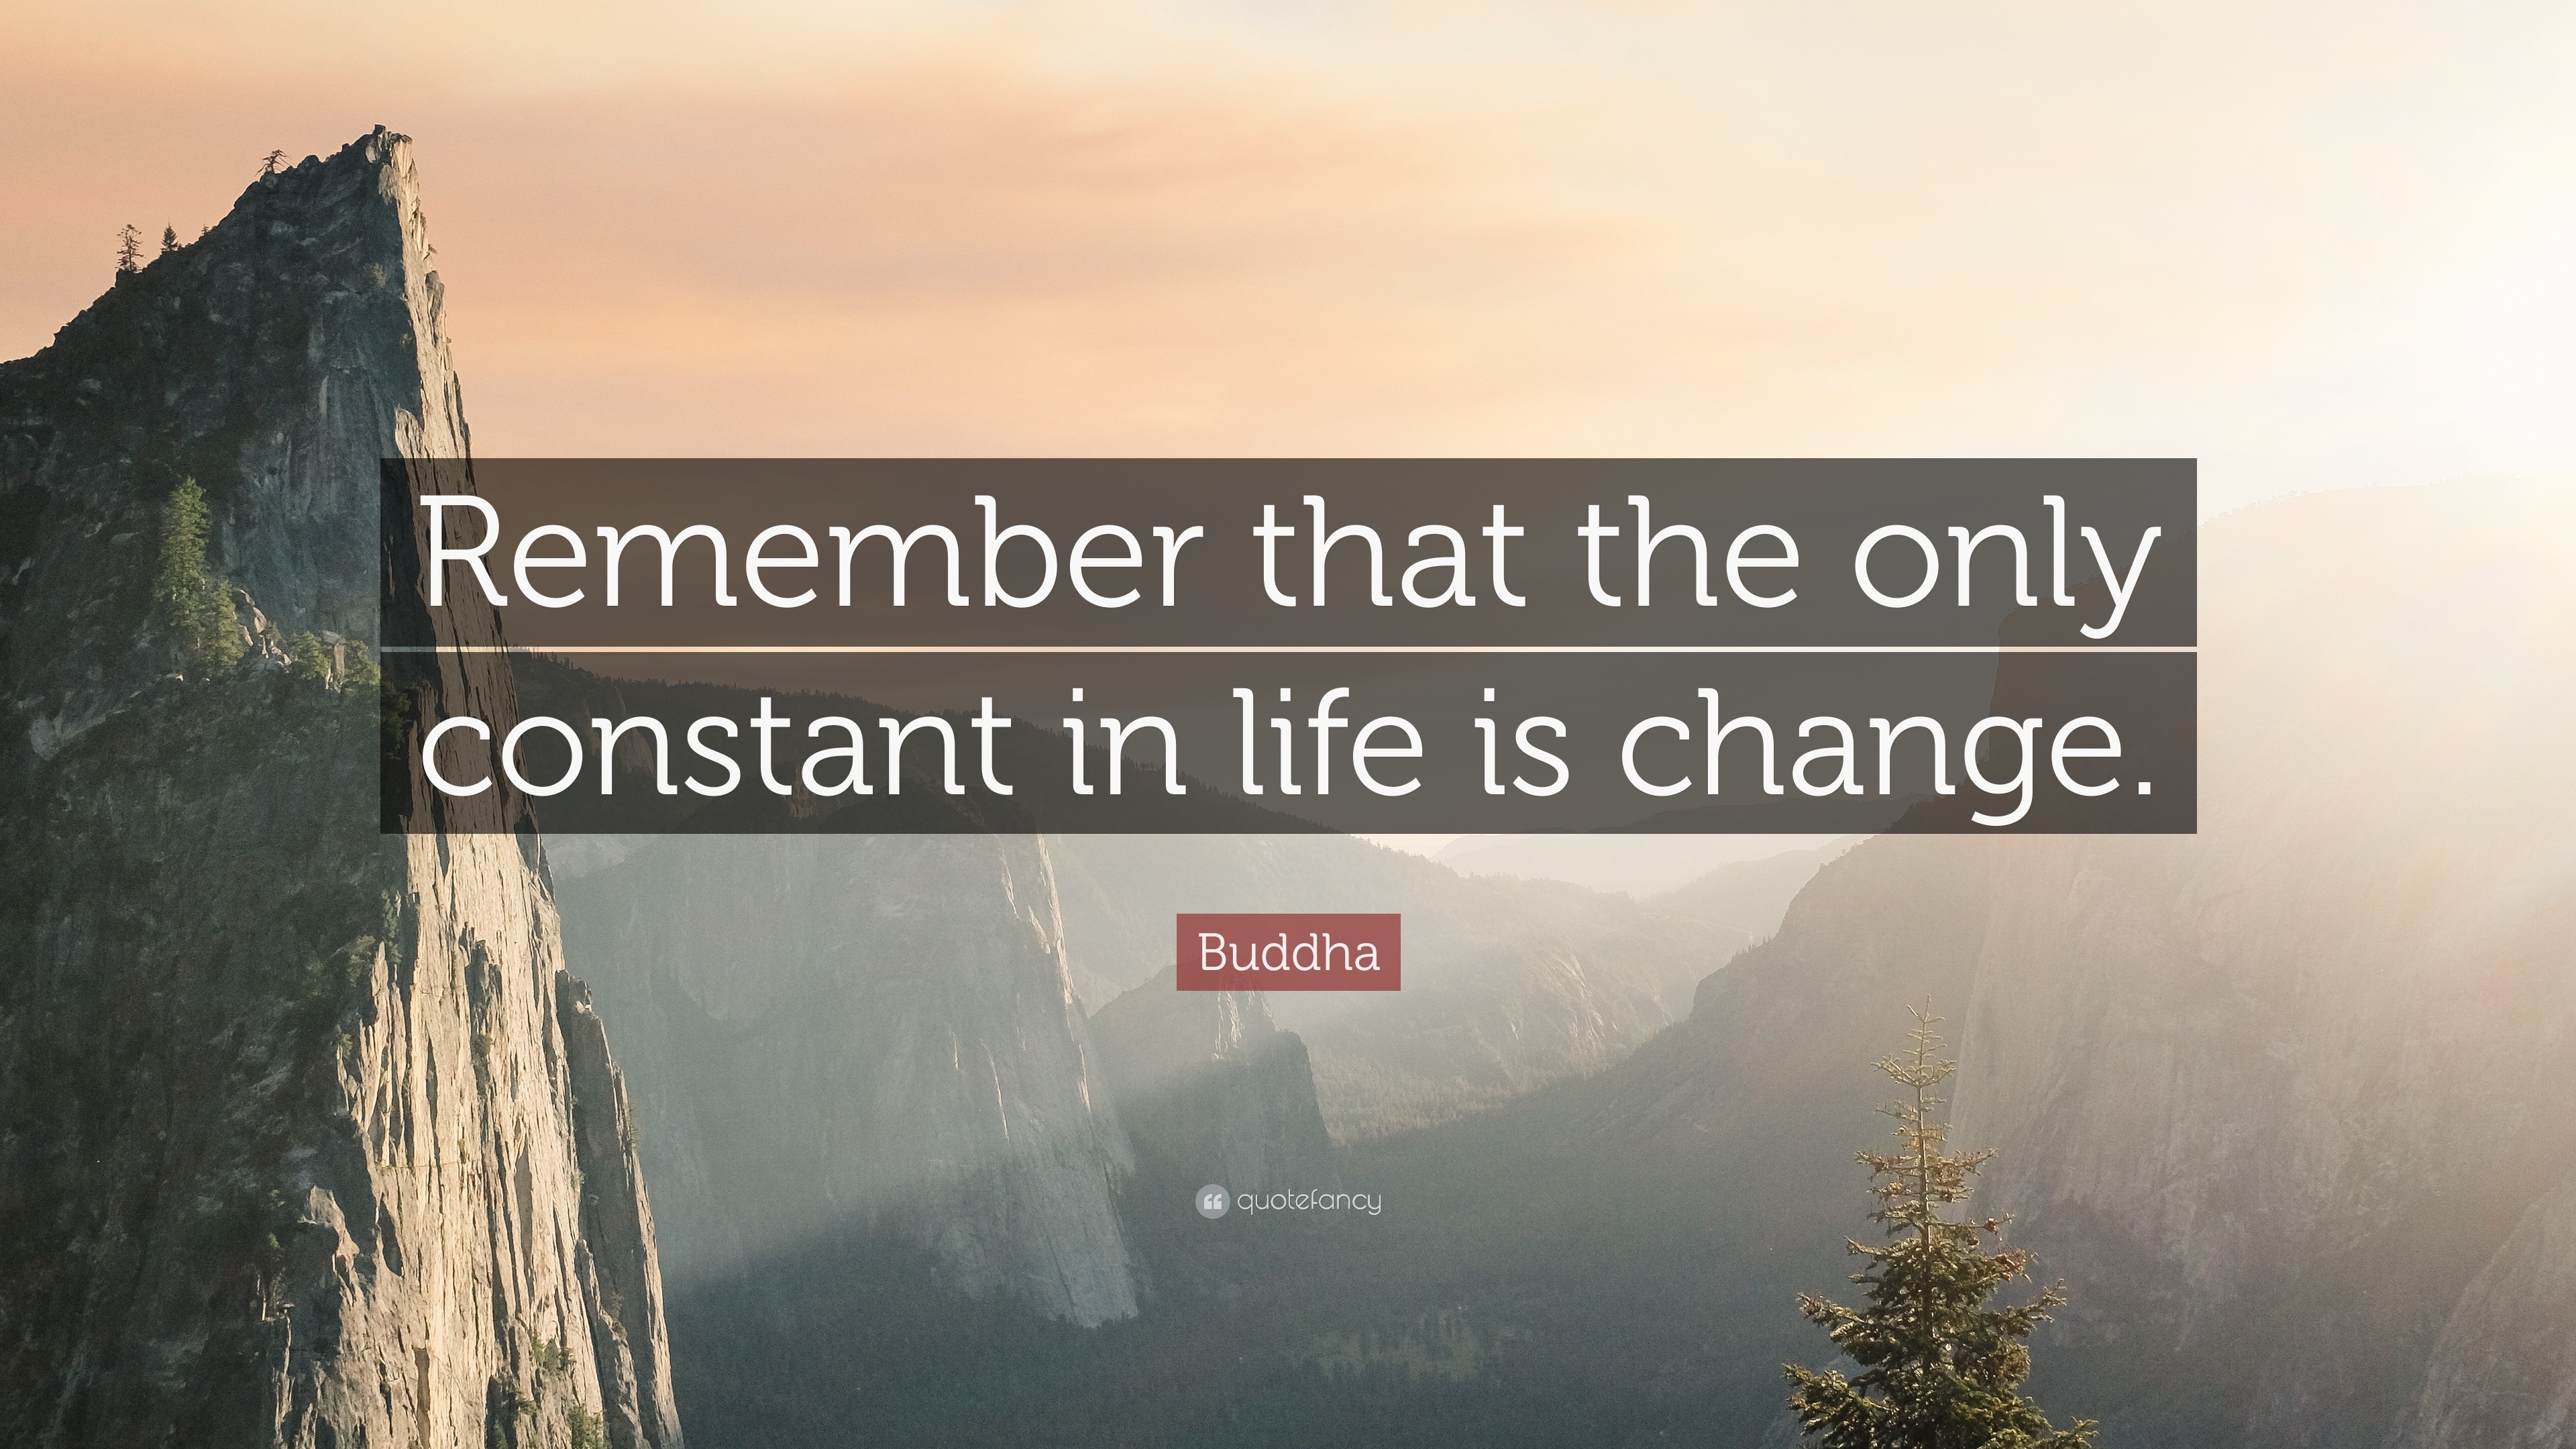 Buddha Quote “Remember that the only constant in life is change ”